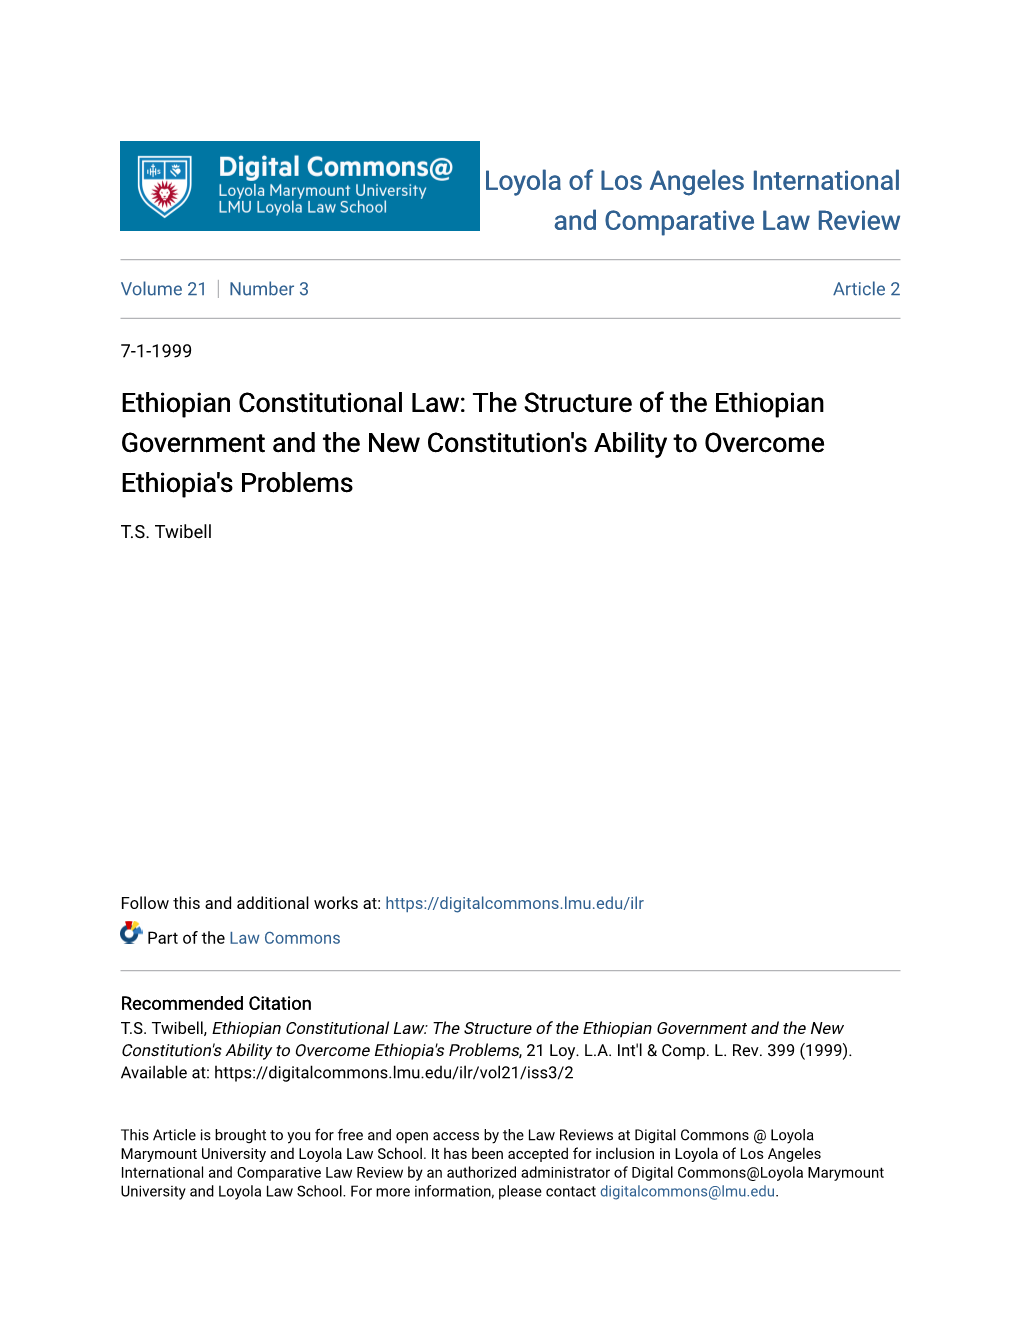 Ethiopian Constitutional Law: the Structure of the Ethiopian Government and the New Constitution's Ability to Overcome Ethiopia's Problems